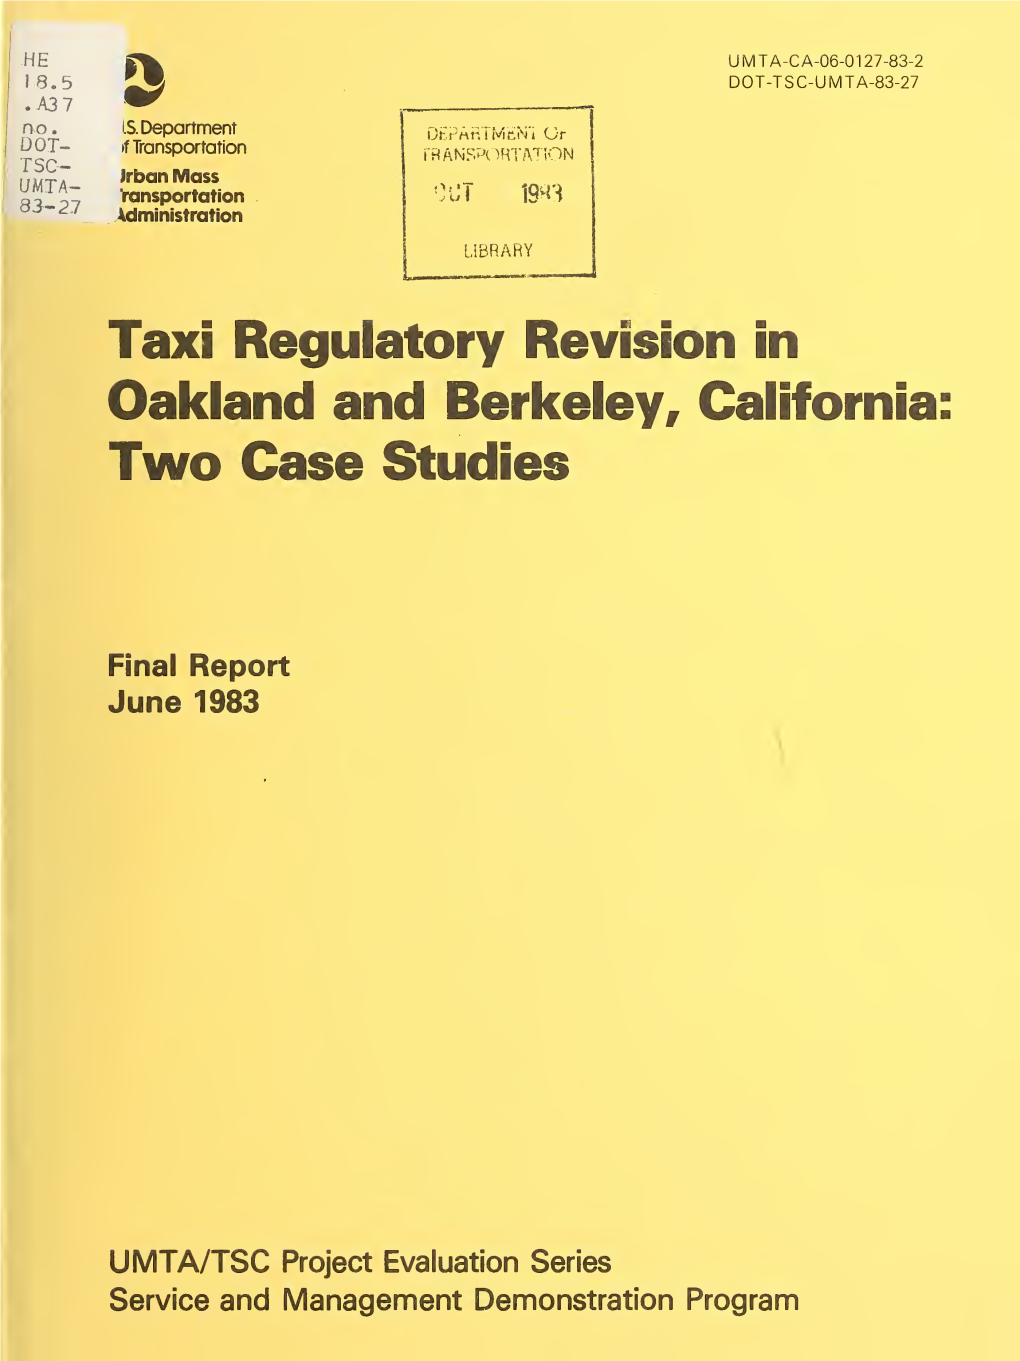 Taxi Regulatory Revision in Oakland and Berkeley, California : Two Case